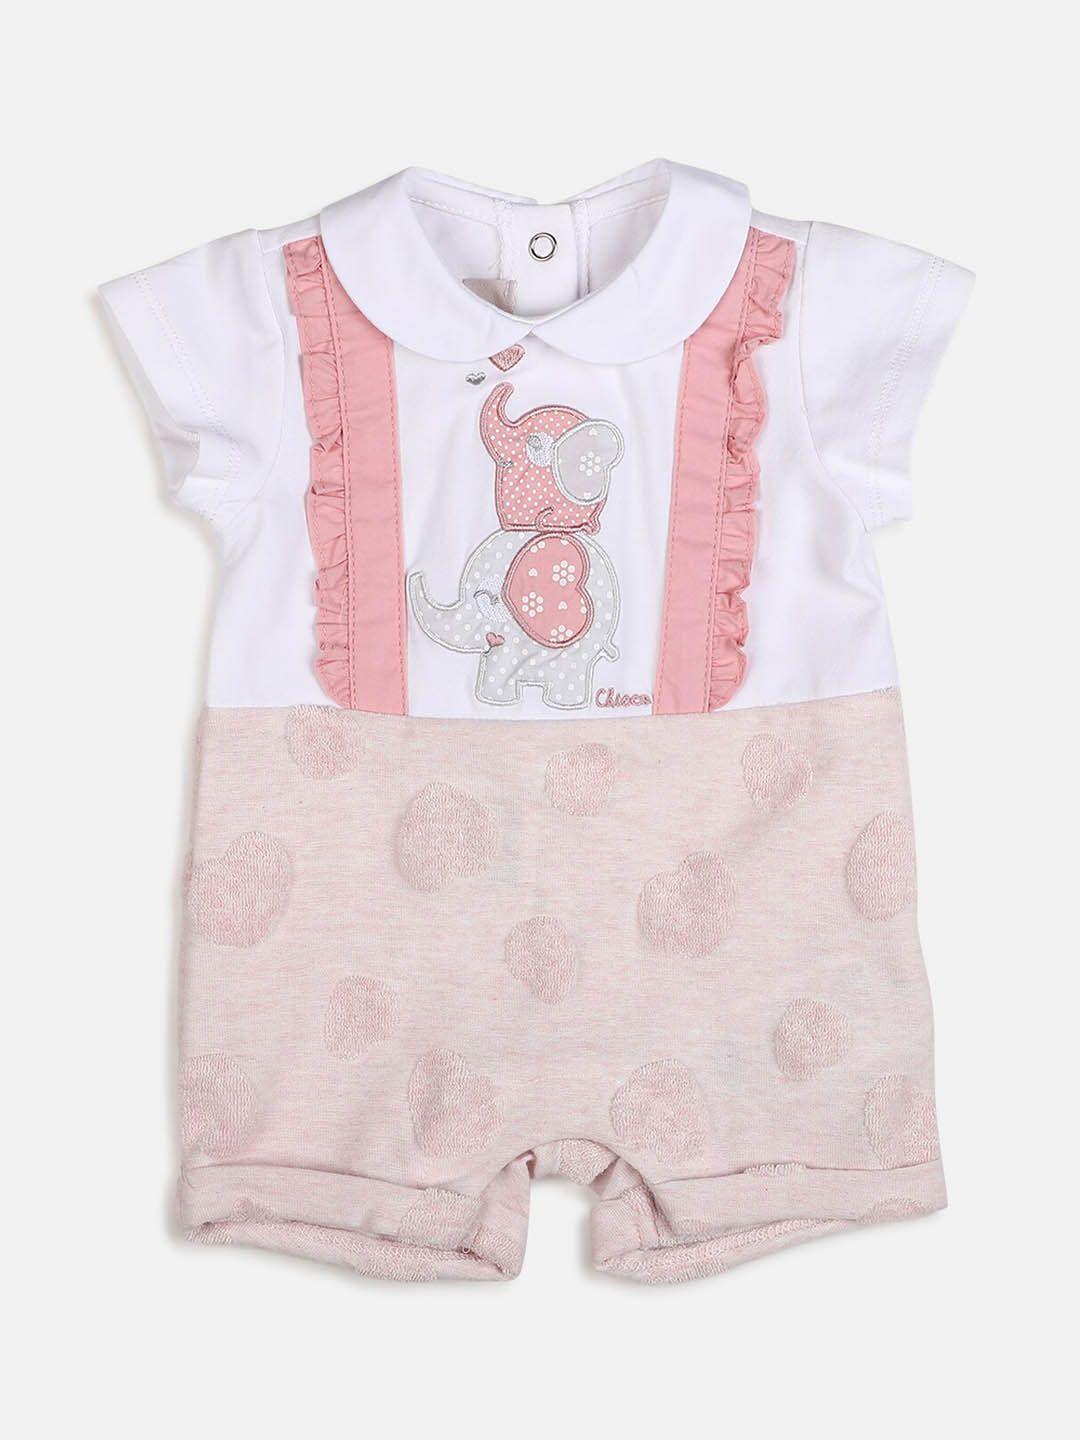 chicco-infants-girls-self-designed-&-embroidered-pure-cotton-romper